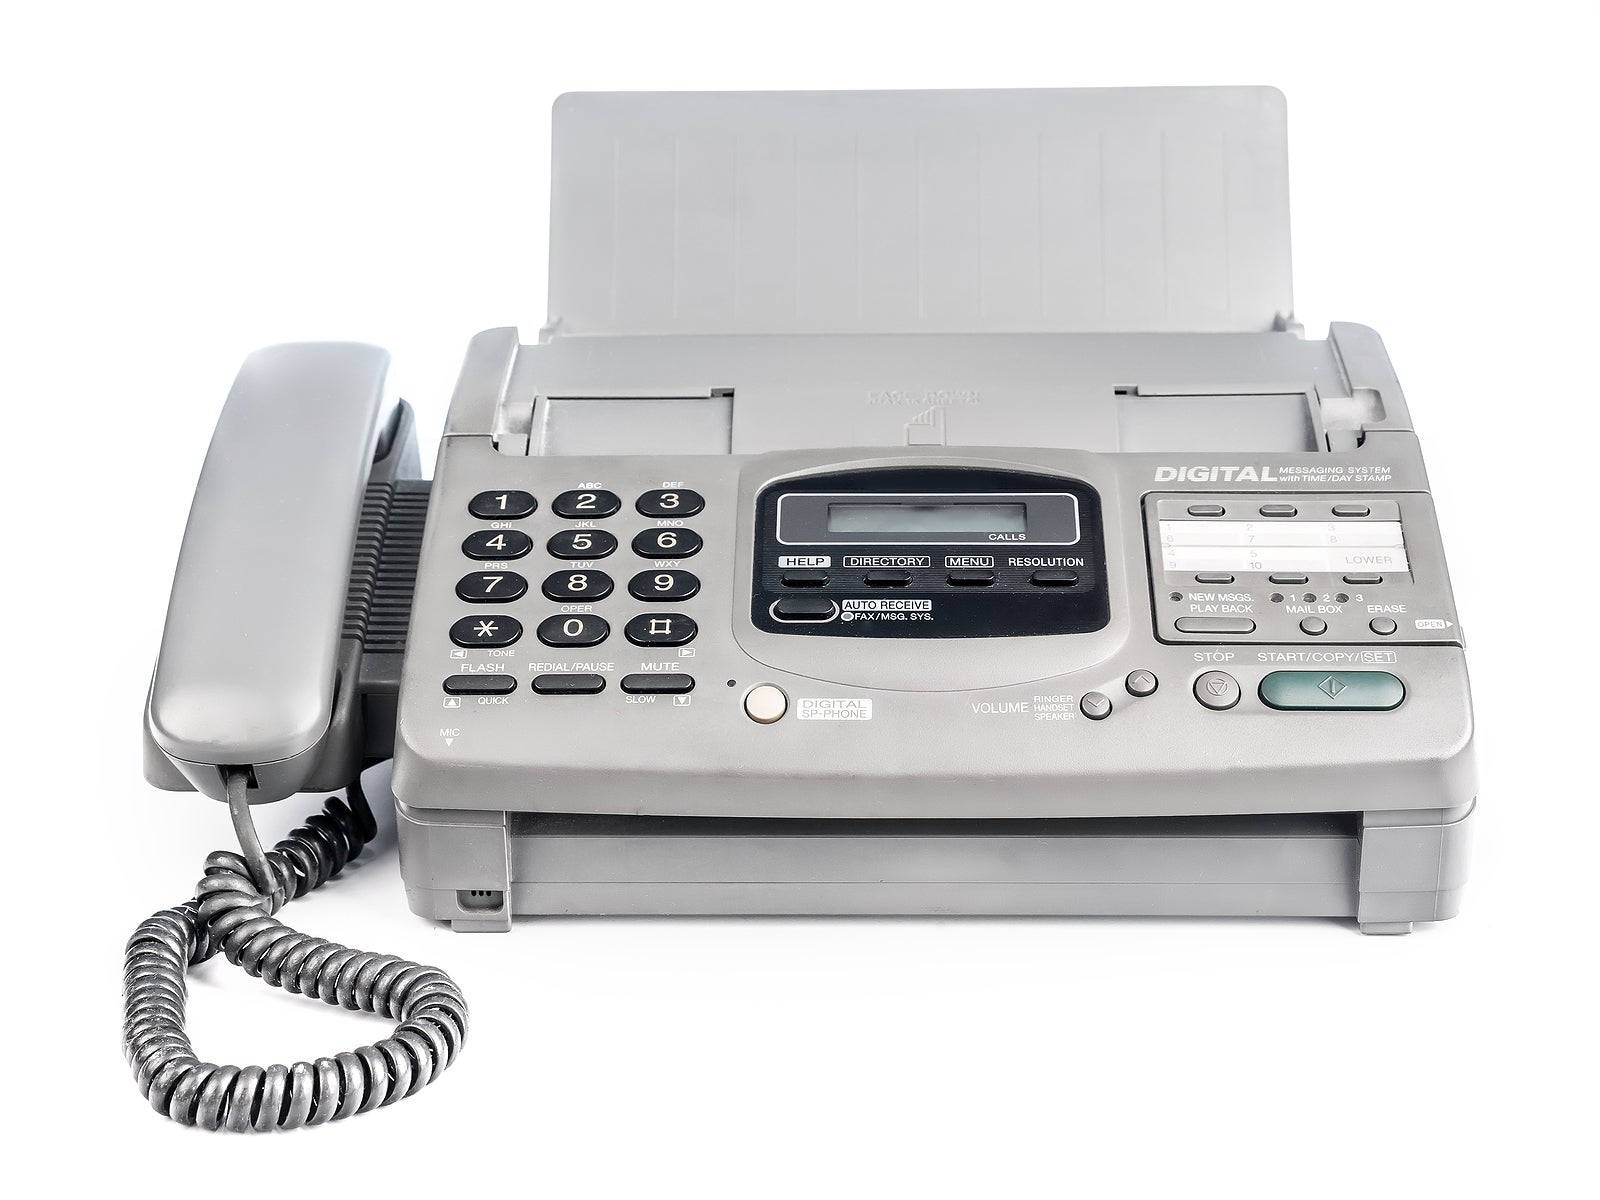 Old office fax machine shot on white background